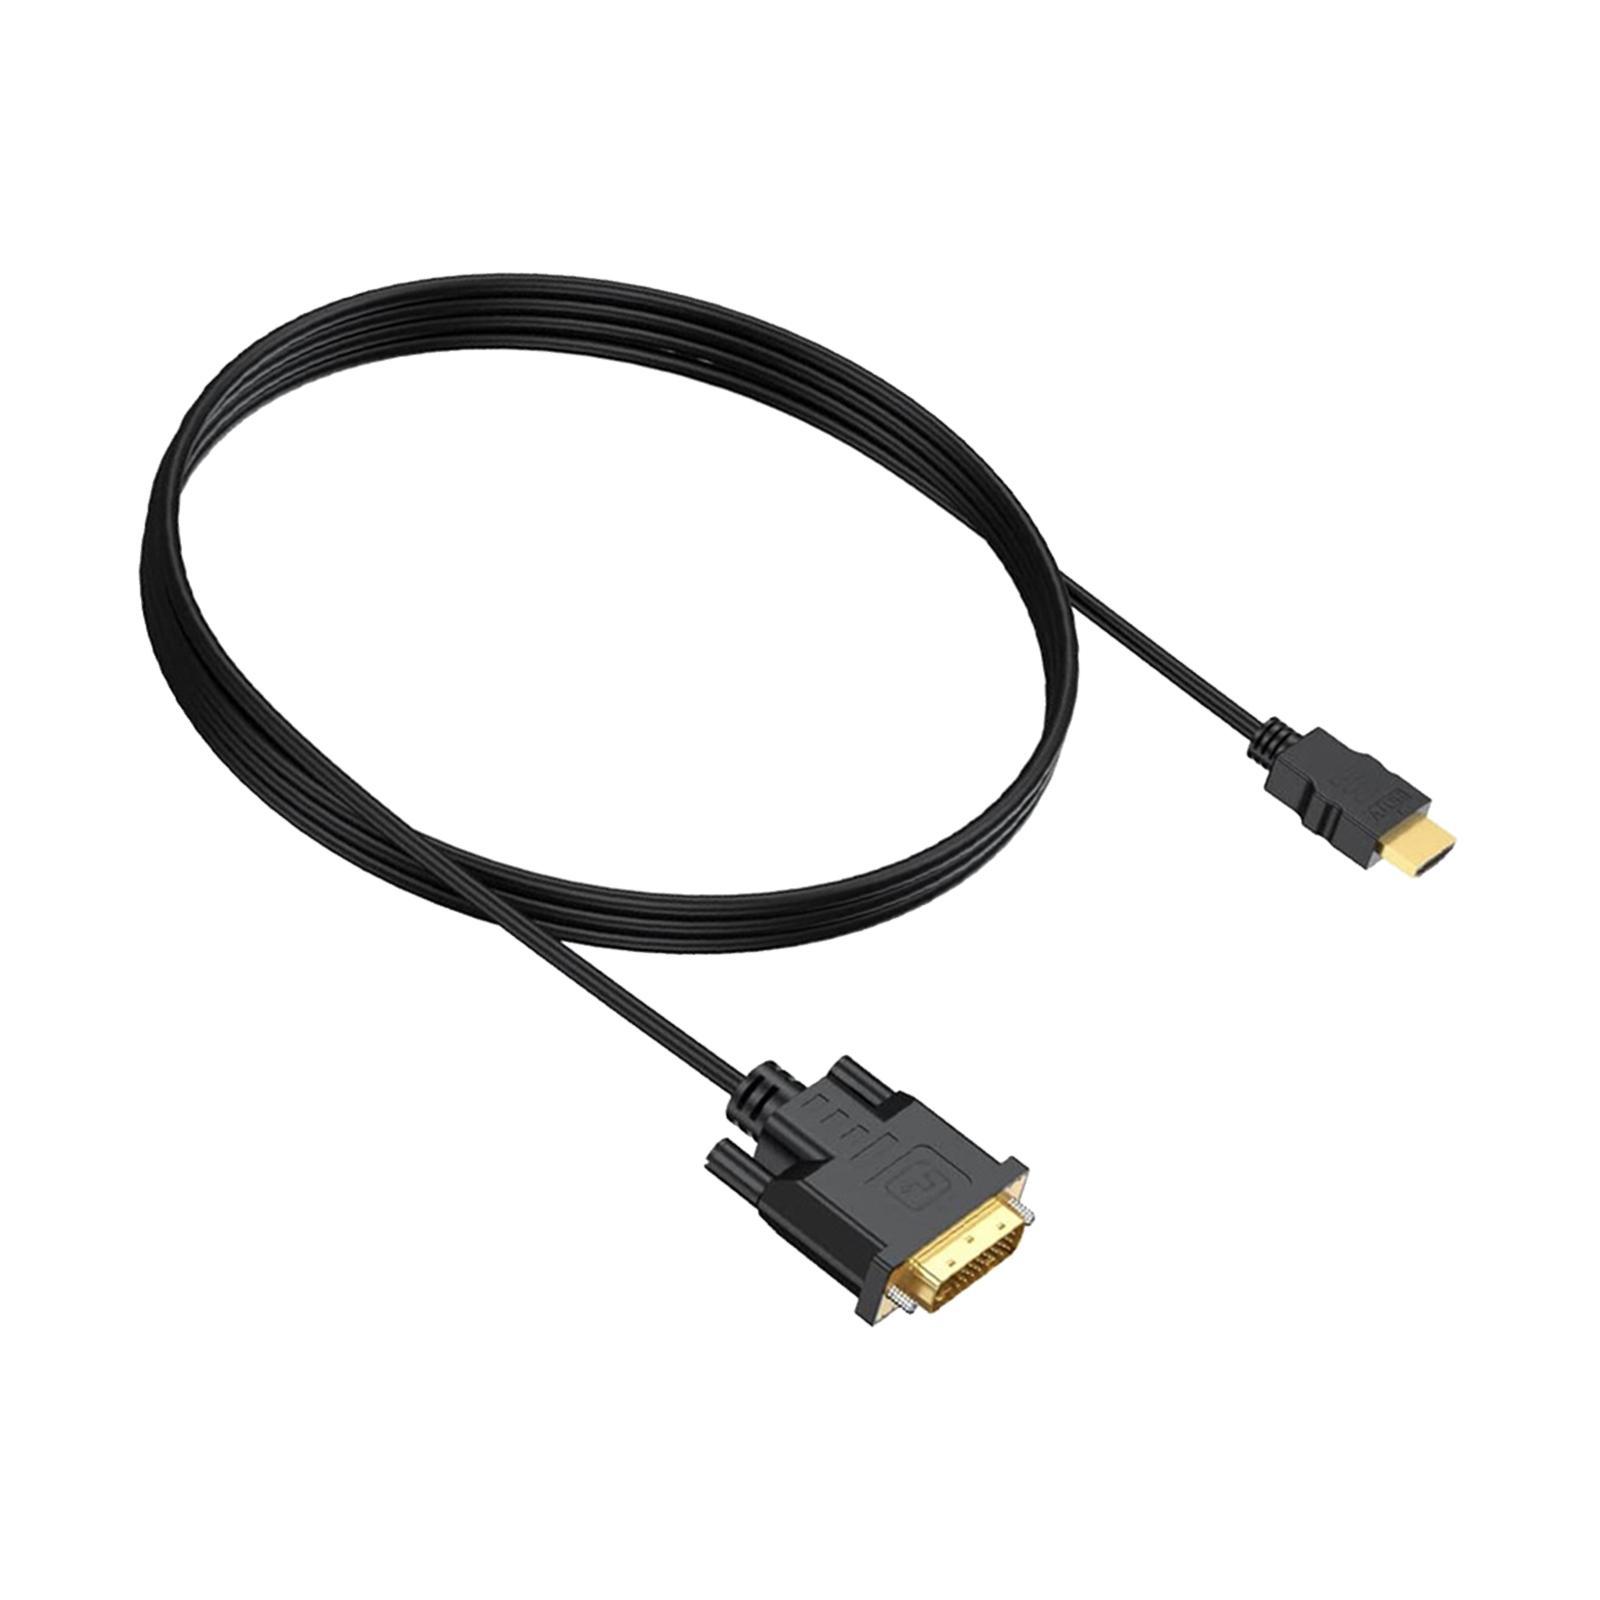 to Adapter Cable Male to -D Male for Desktops TV Monitors